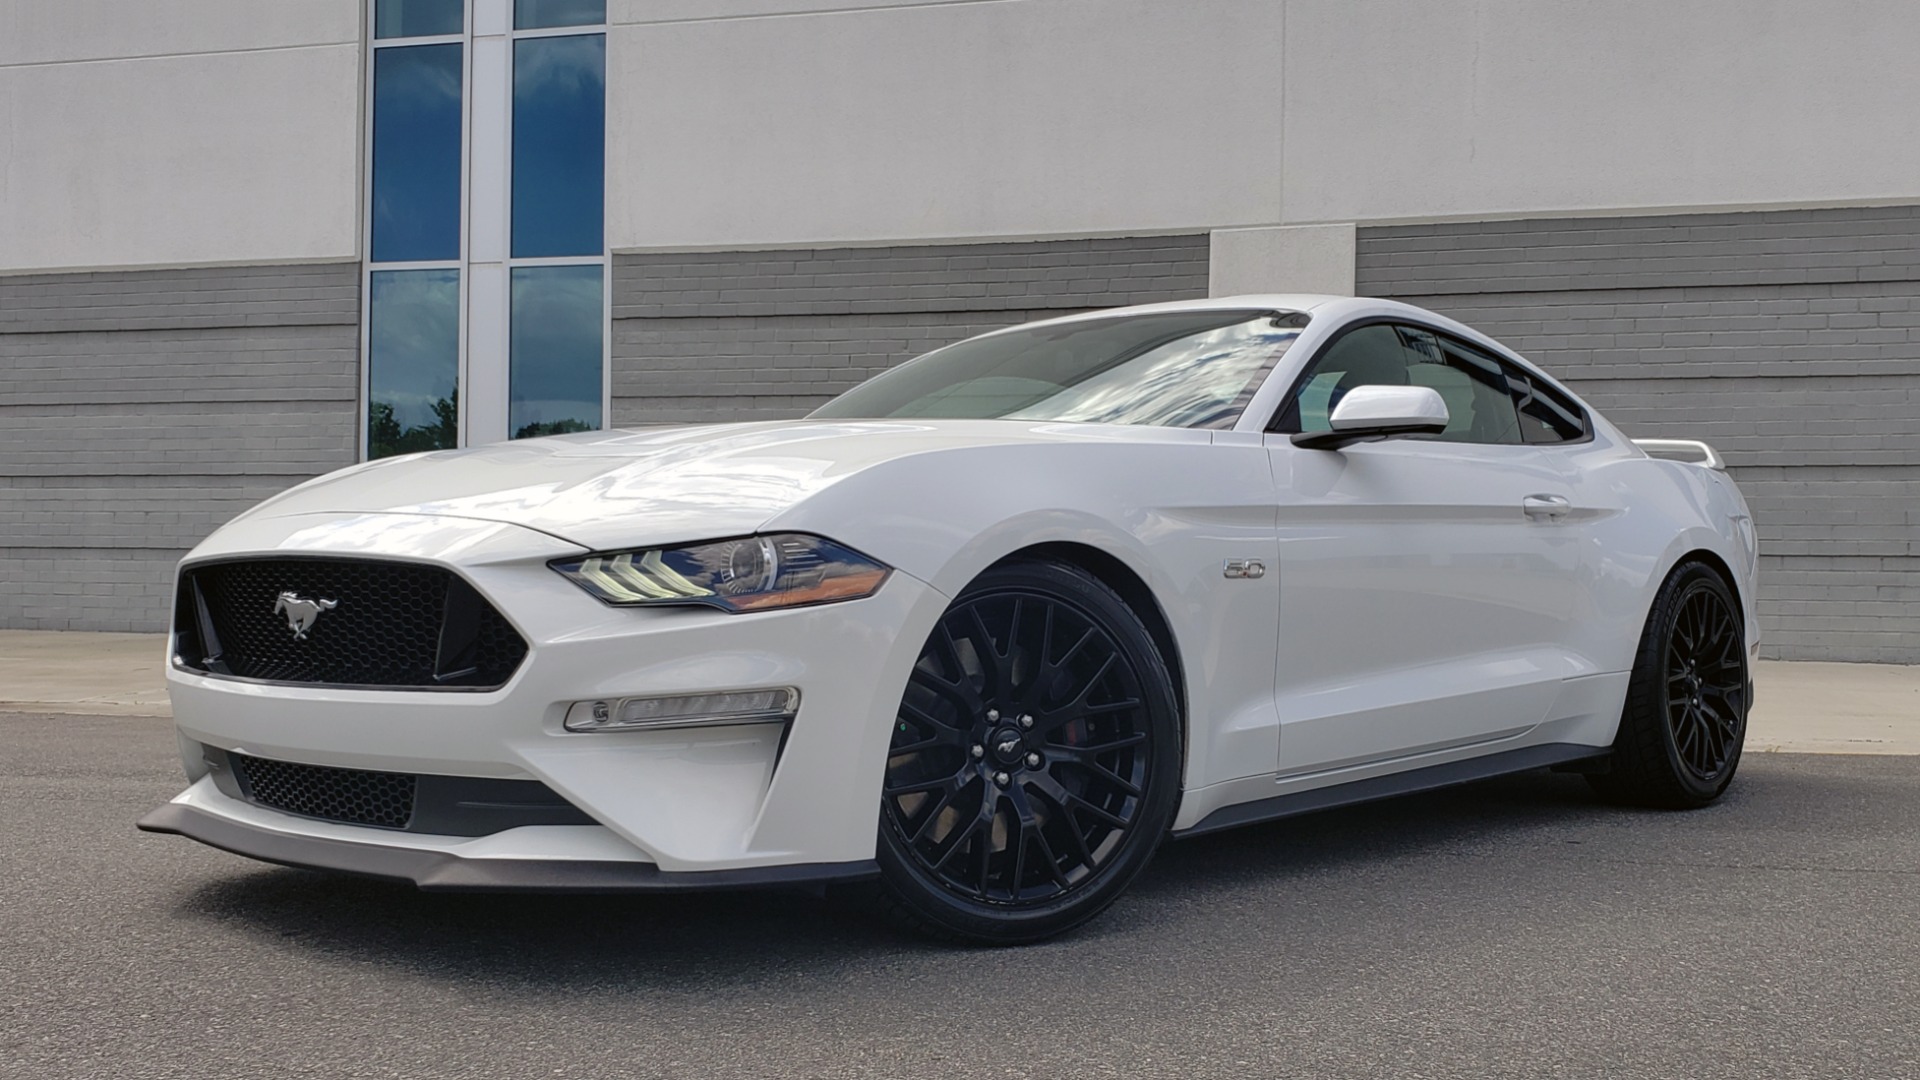 Used 2018 Ford MUSTANG GT COUPE / 5.0L V8 / AUTO / PERF PKG / REARVIEW / 19IN WHLS for sale Sold at Formula Imports in Charlotte NC 28227 3